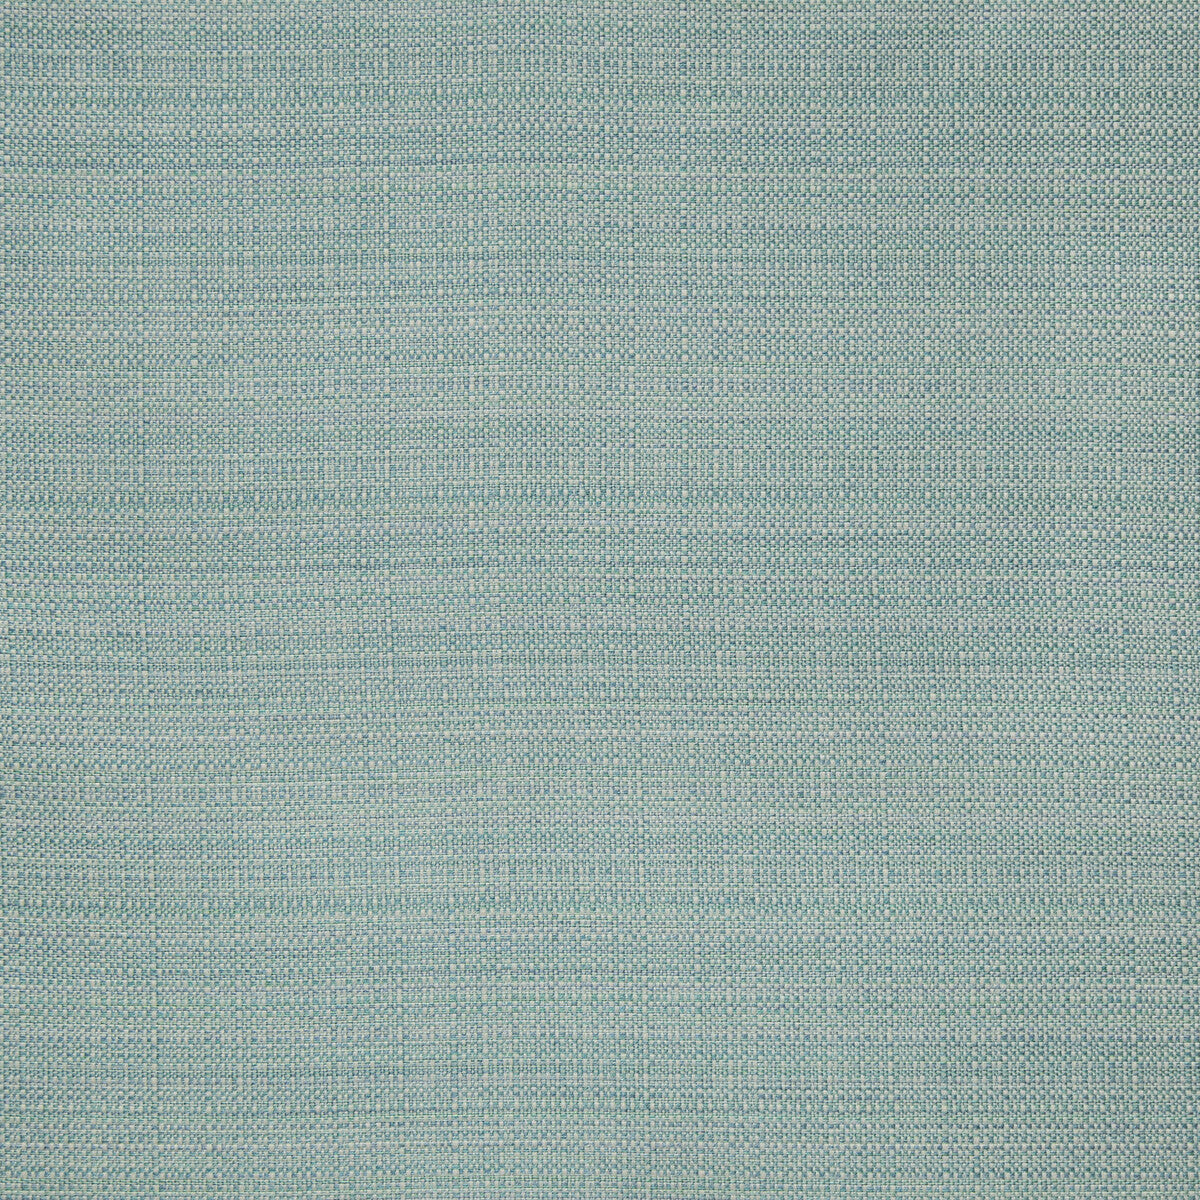 Arroyo fabric in surf color - pattern 35823.13.0 - by Kravet Design in the Indoor / Outdoor collection